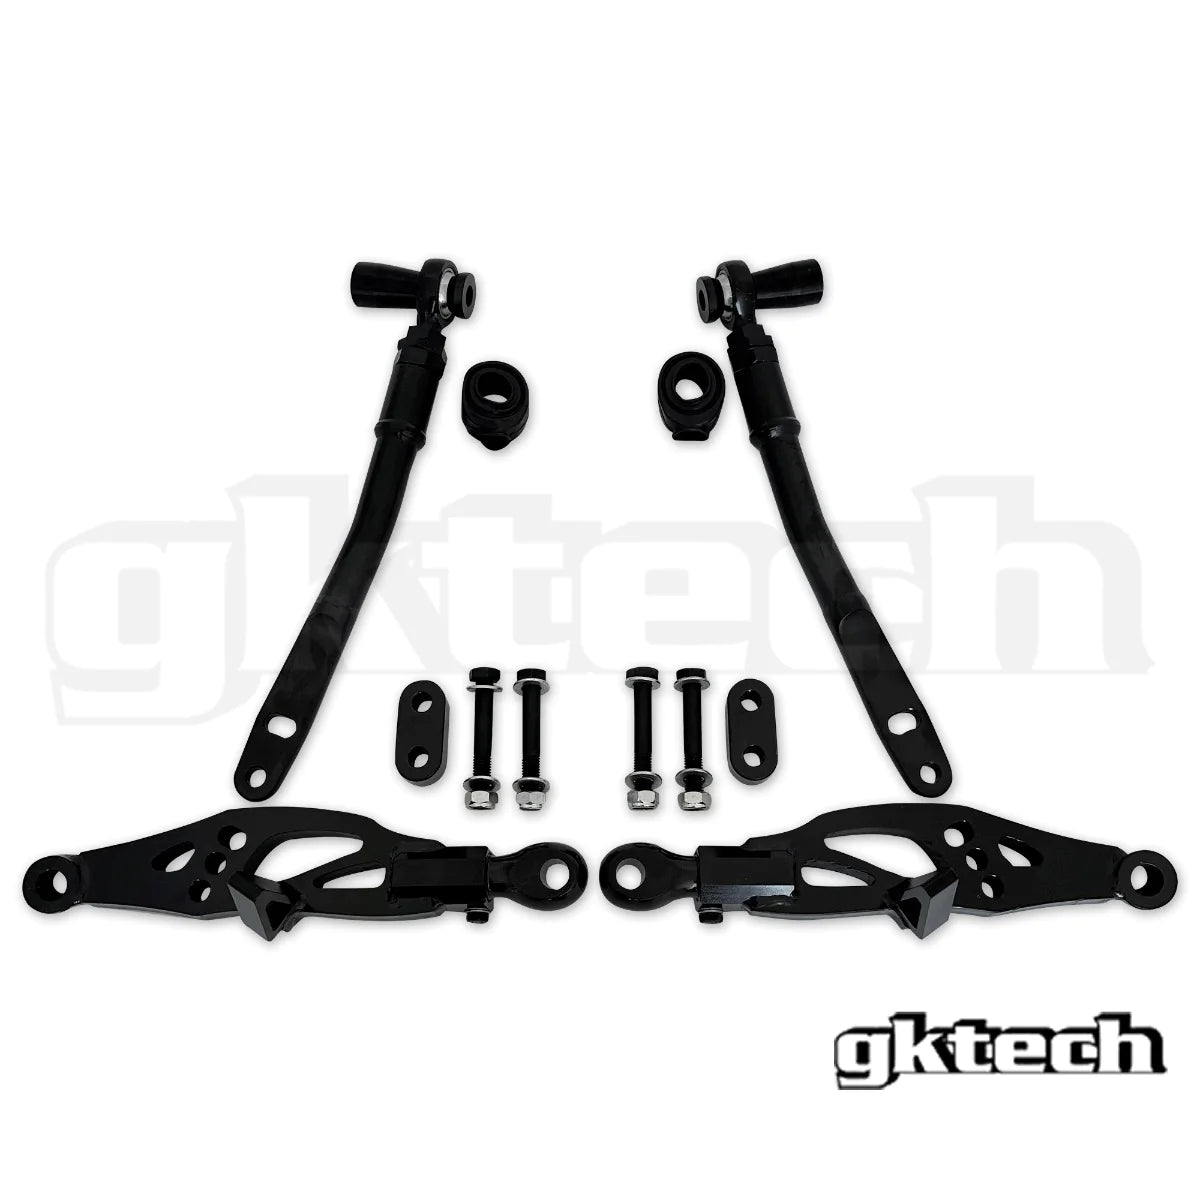 R32/R33 Skyline GT-R front lower control arms